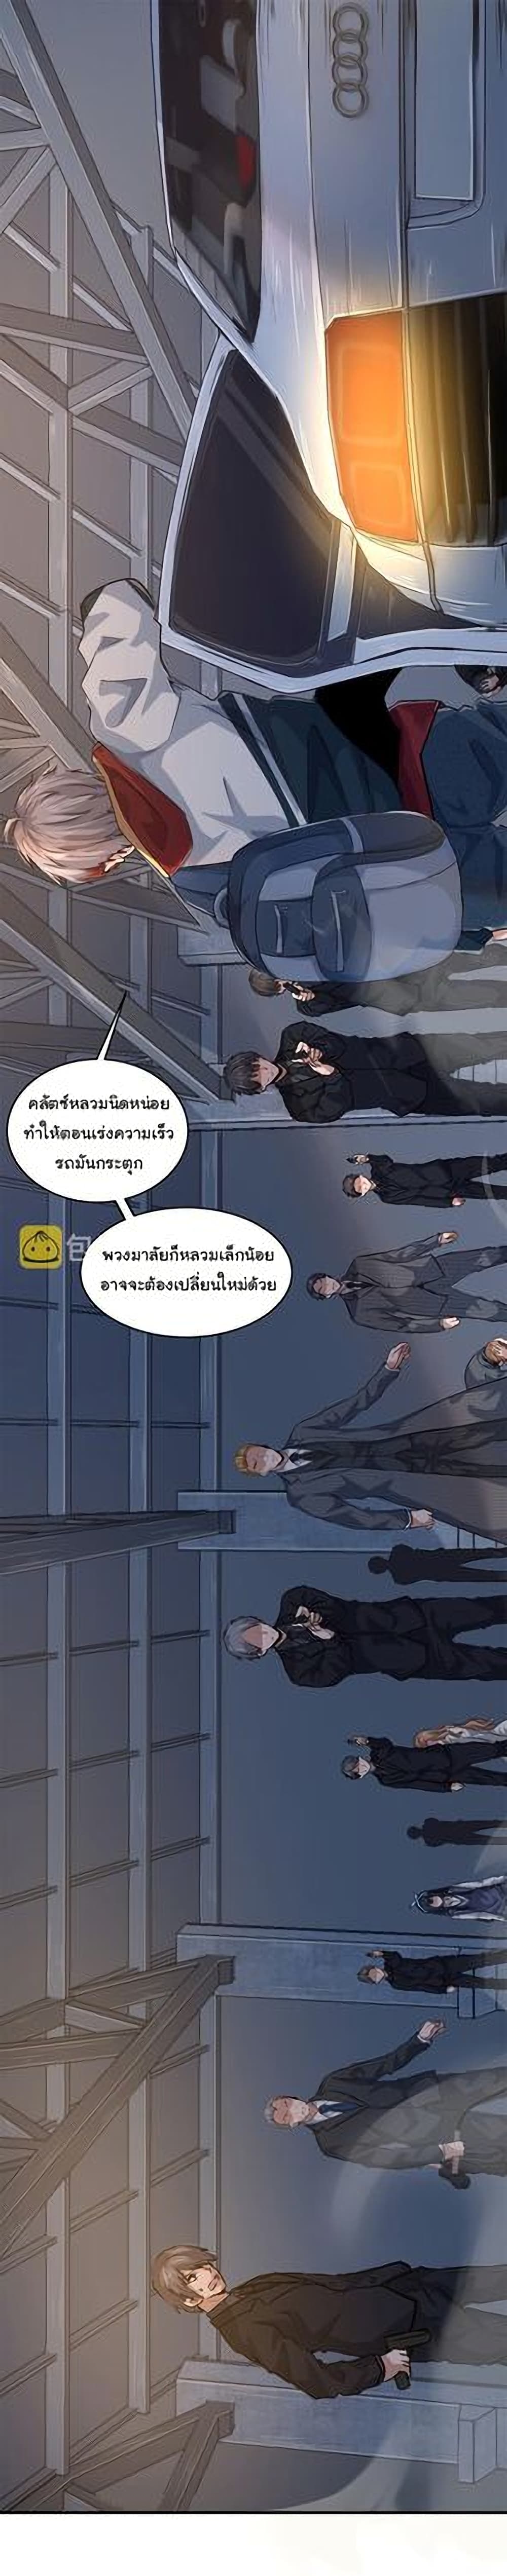 Live Steadily, Donโ€t Wave เธ•เธญเธเธ—เธตเน 11 (60)